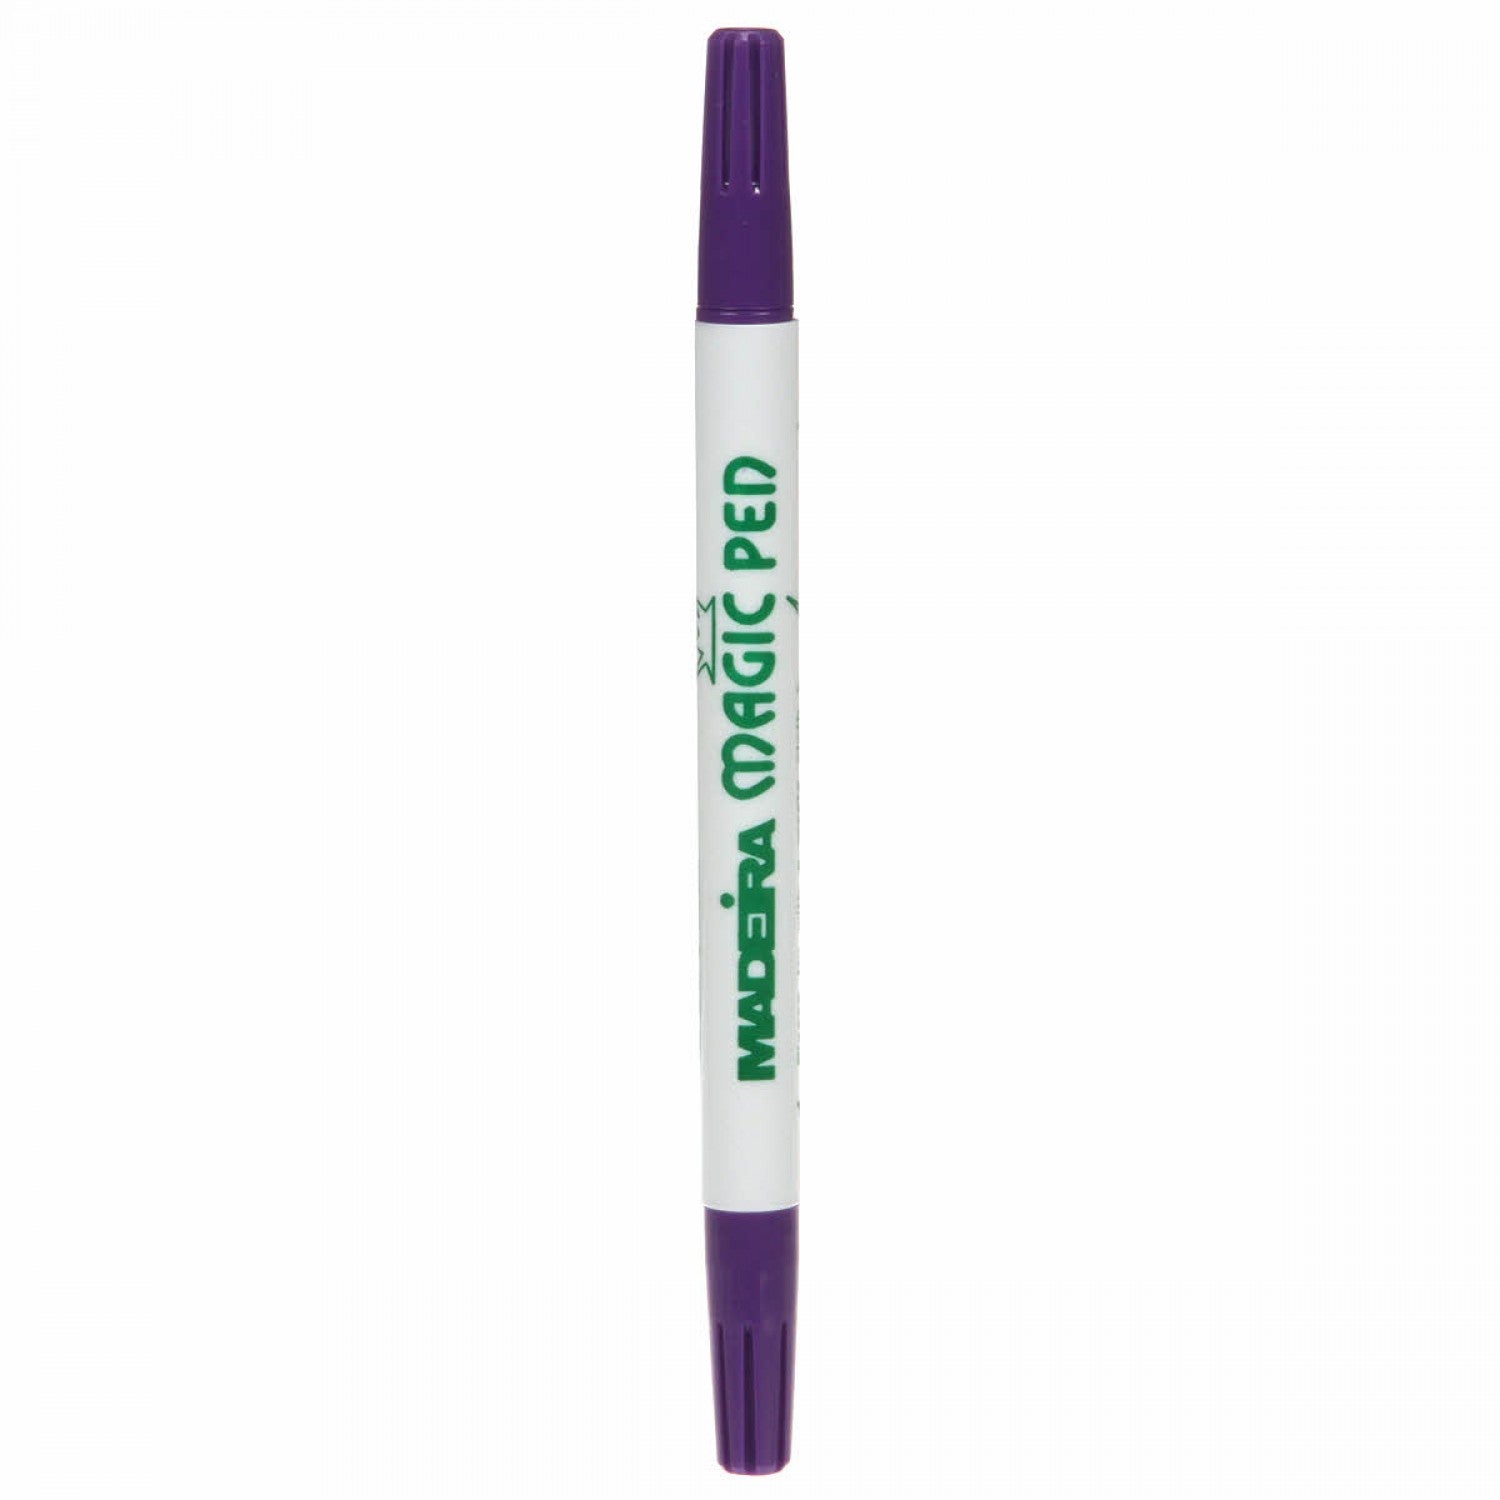 Madeira Magic Pen Vanishing Dual Ended Fabric Marker Pen By Madeira